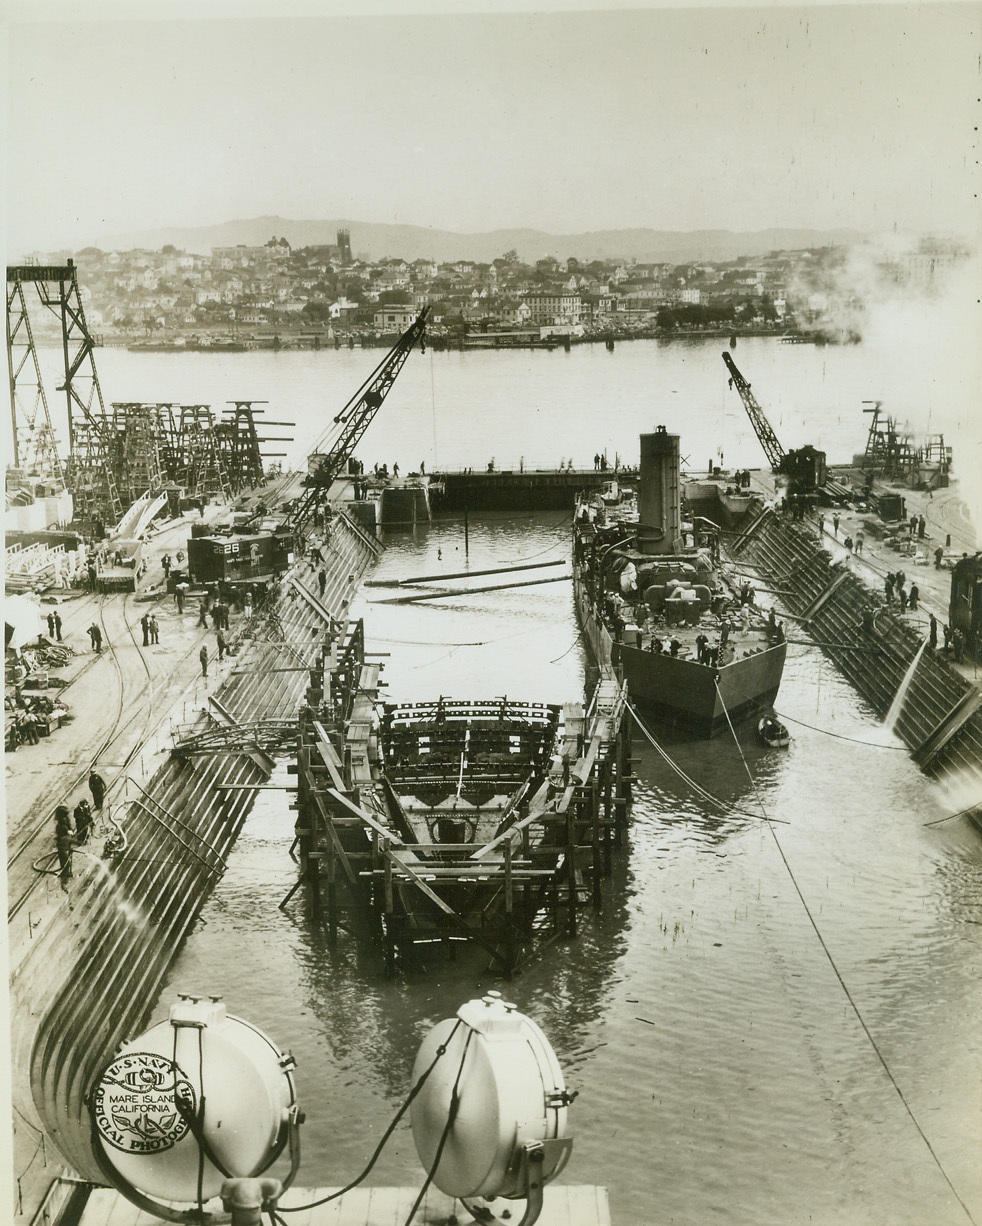 USS SHAW TAKES A BOW, 3/9/1942. AT A PACIFIC COAST NAVY YARD – The destroyer USS Shaw, badly damaged in the Dec. 7 attack on Pearl Harbor, is shown being floated into drydock for the removal of her temporary bow and the addition of her new forward section, shown in left foreground. The temporary snub bow was fitted onto the Shaw after the vessel was blasted at Pearl Harbor. She reached the mainland under her own power. Credit: U.S. Navy photo via OWI Radiophoto from ACME;